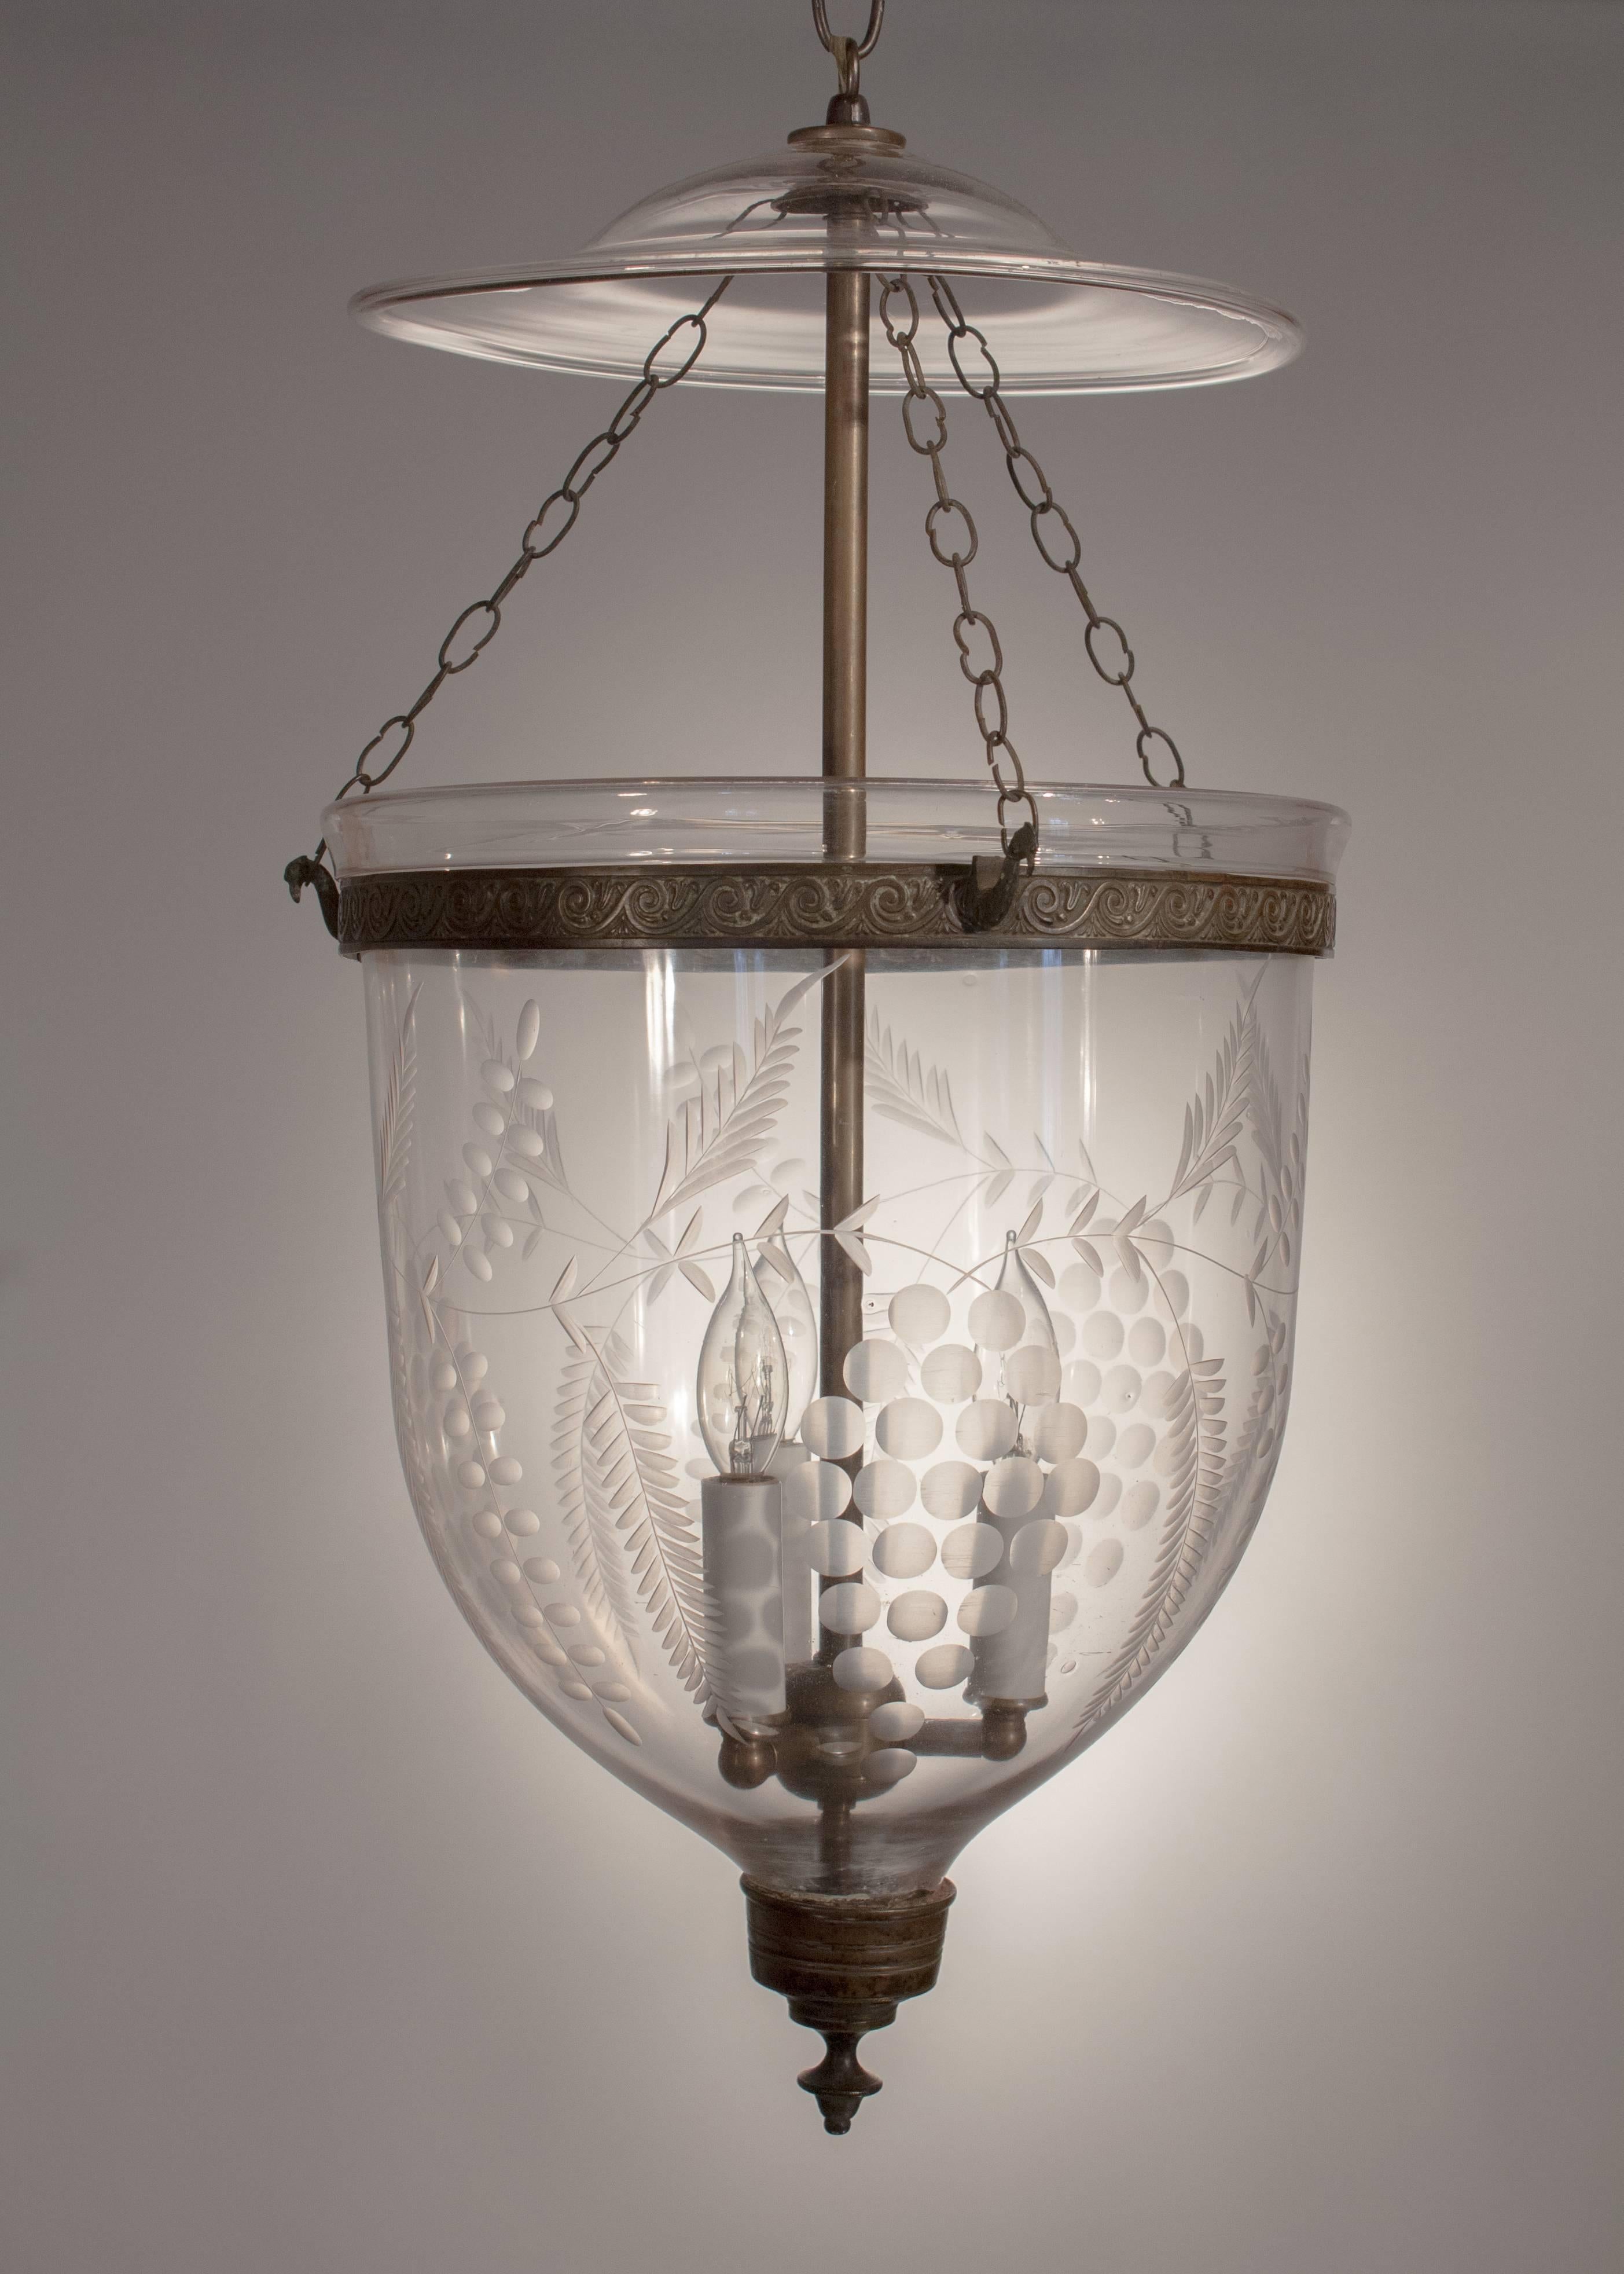 Classic English handblown glass bell jar lantern, circa 1850, with a grape and vine etched design that complements the shape of this large lantern beautifully. The hall lantern, which is in excellent condition, has its original glass smoke bell,